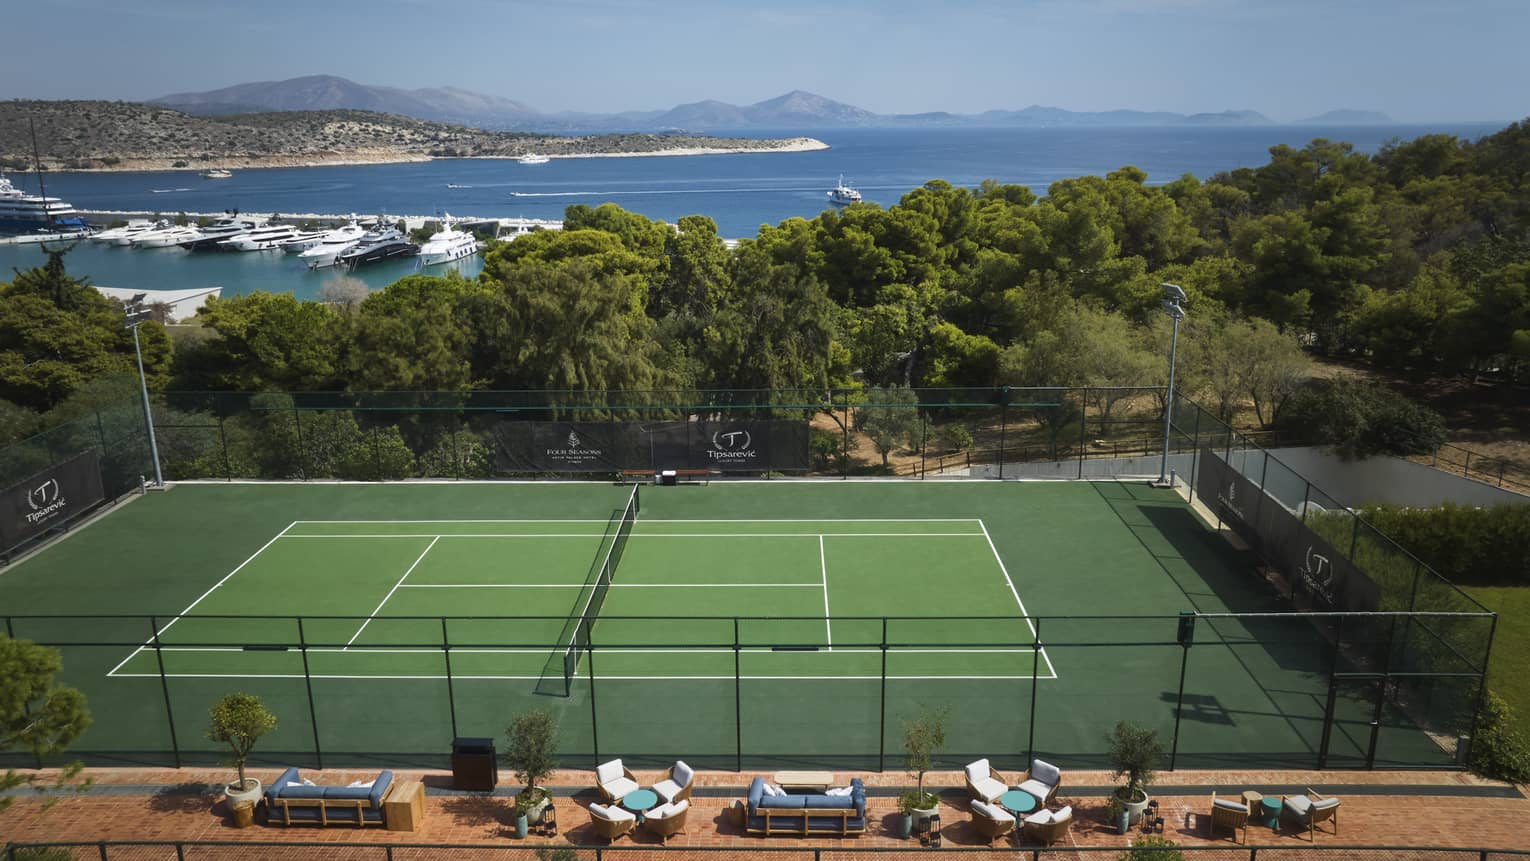 A tennis court with a forest and oceans in the background.